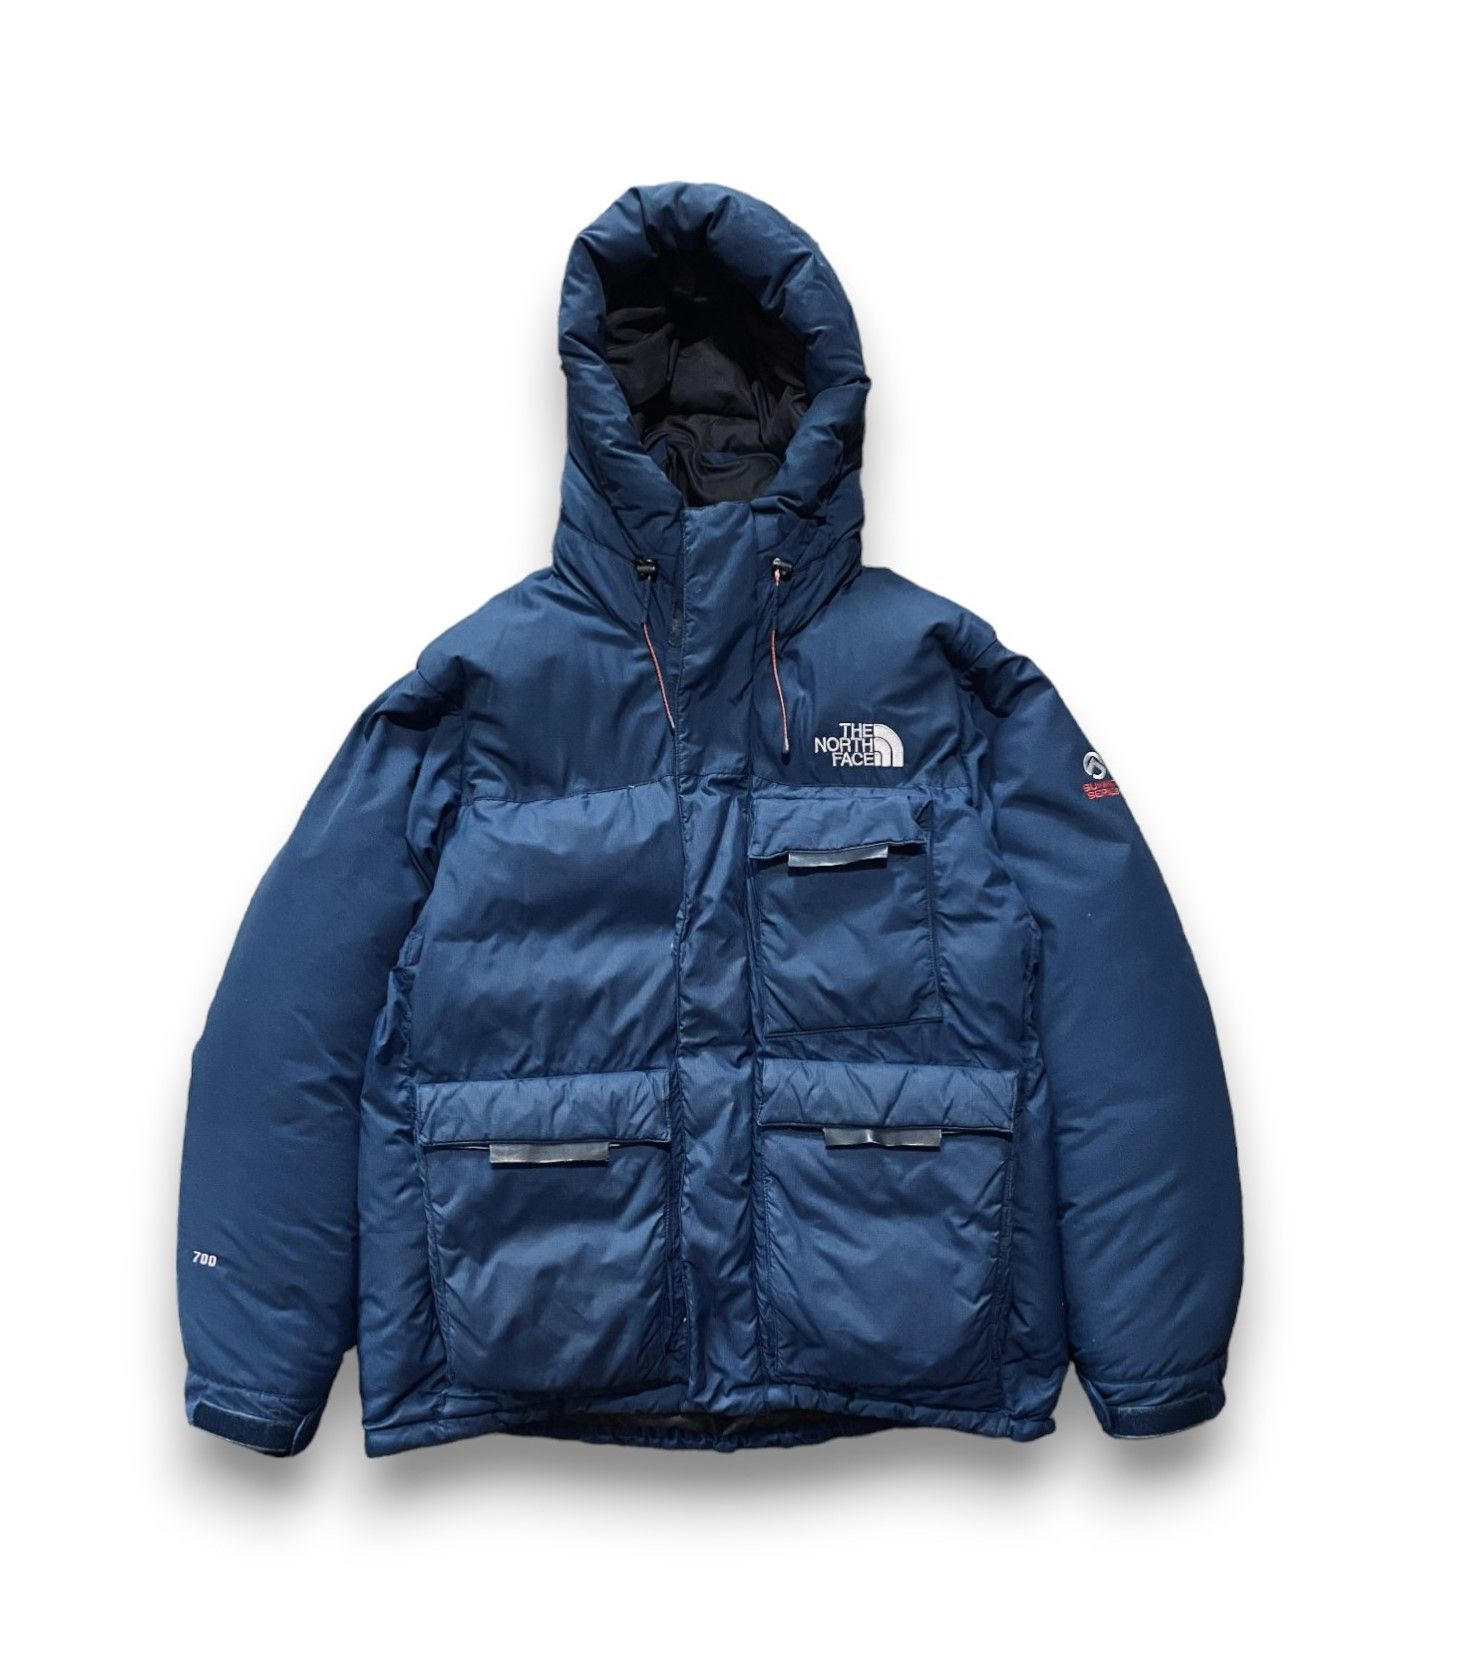 The North Face Puffer Jacket Summit Series 700 Navy - 1